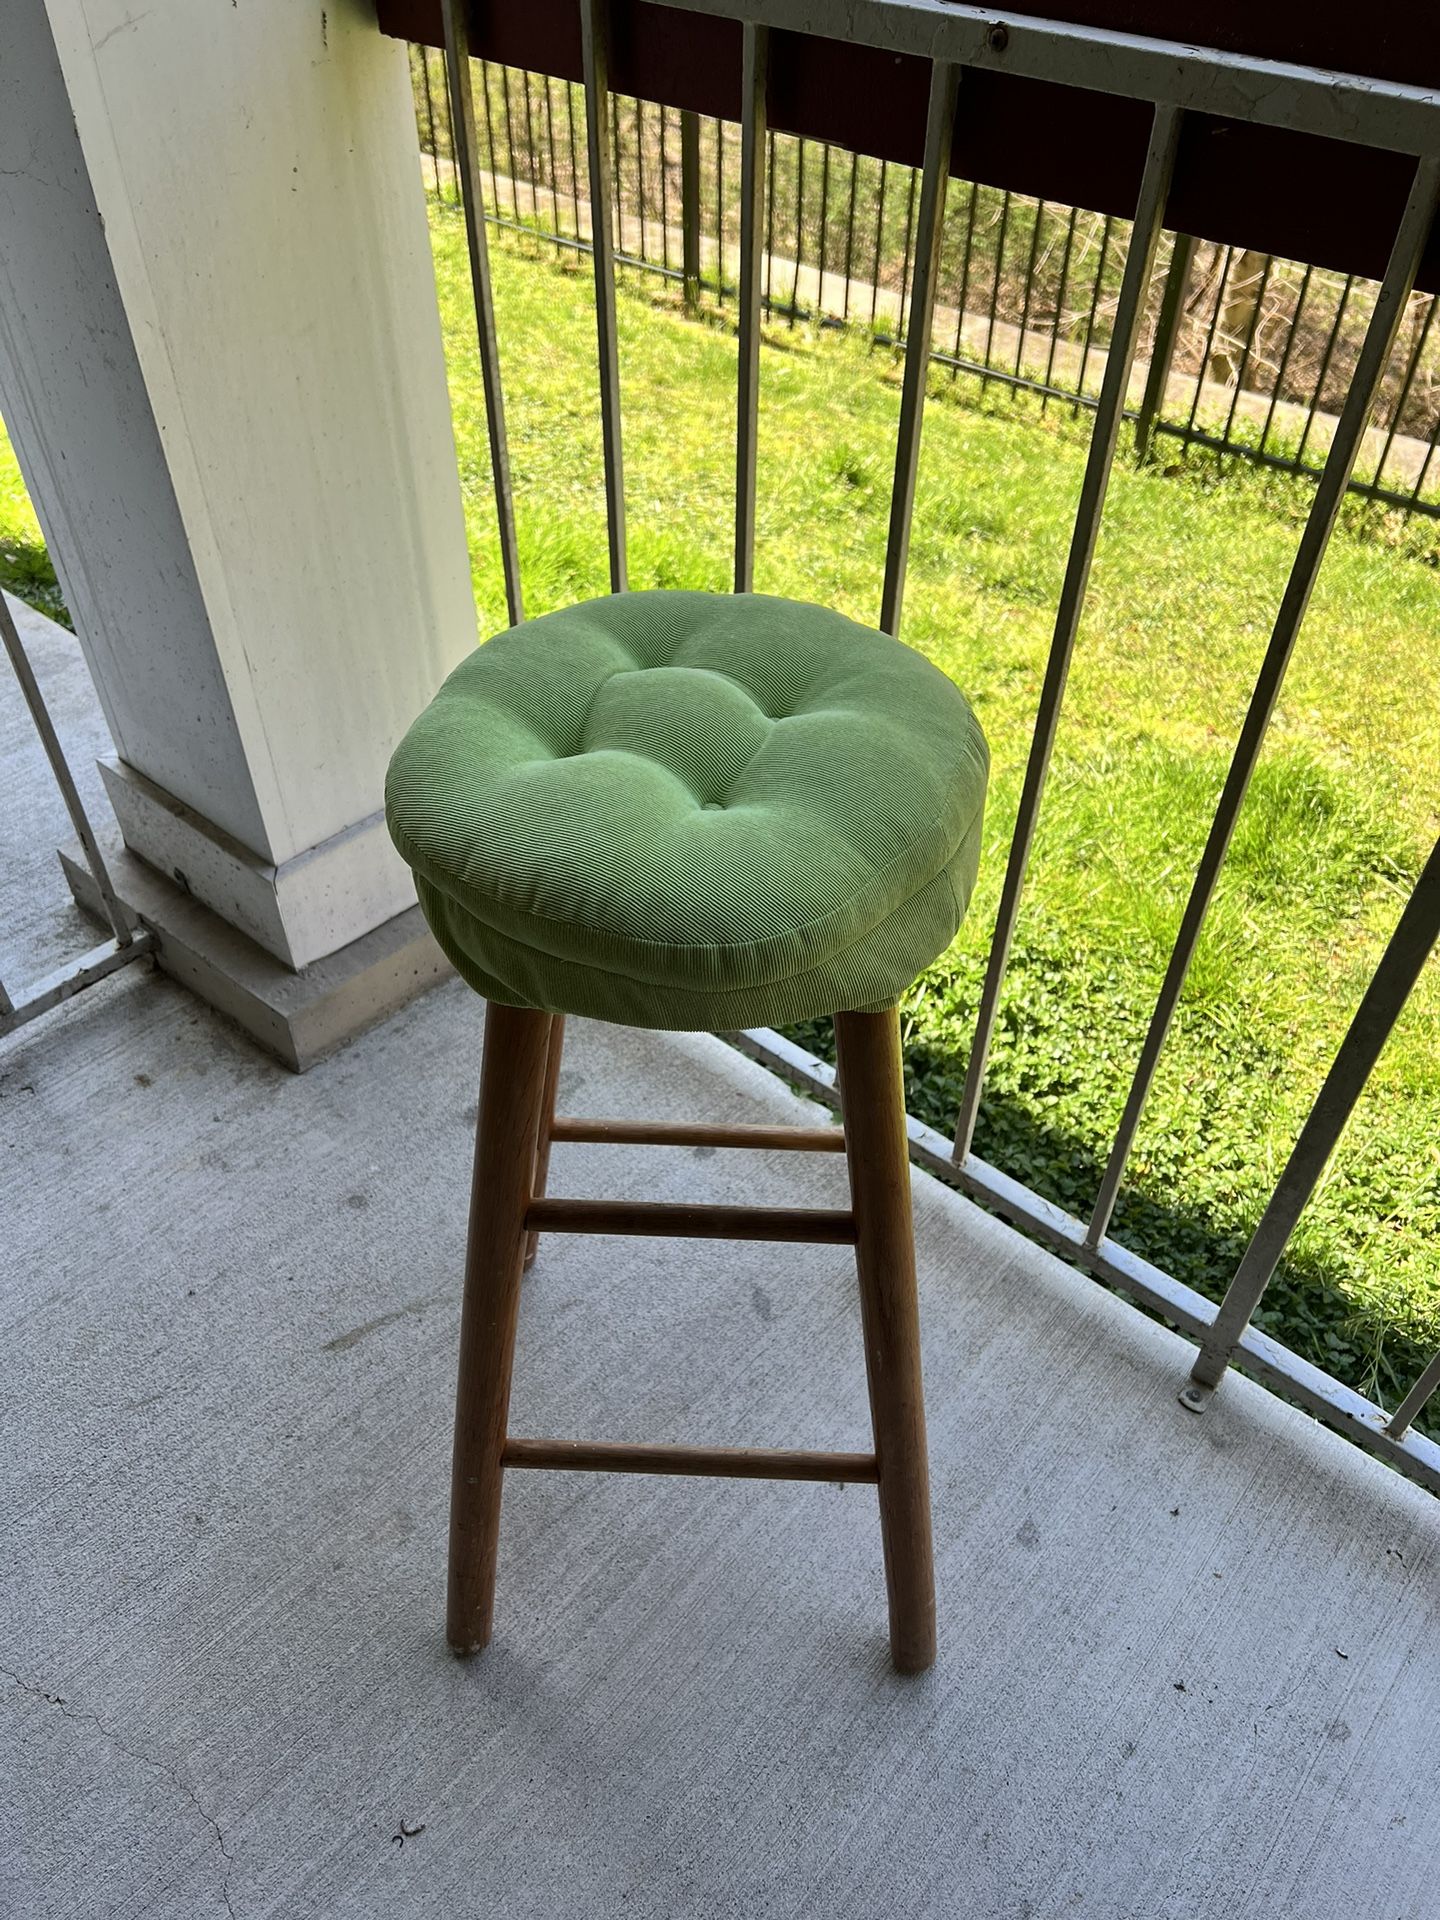 Wood Bar Stool w/ Seat Cover